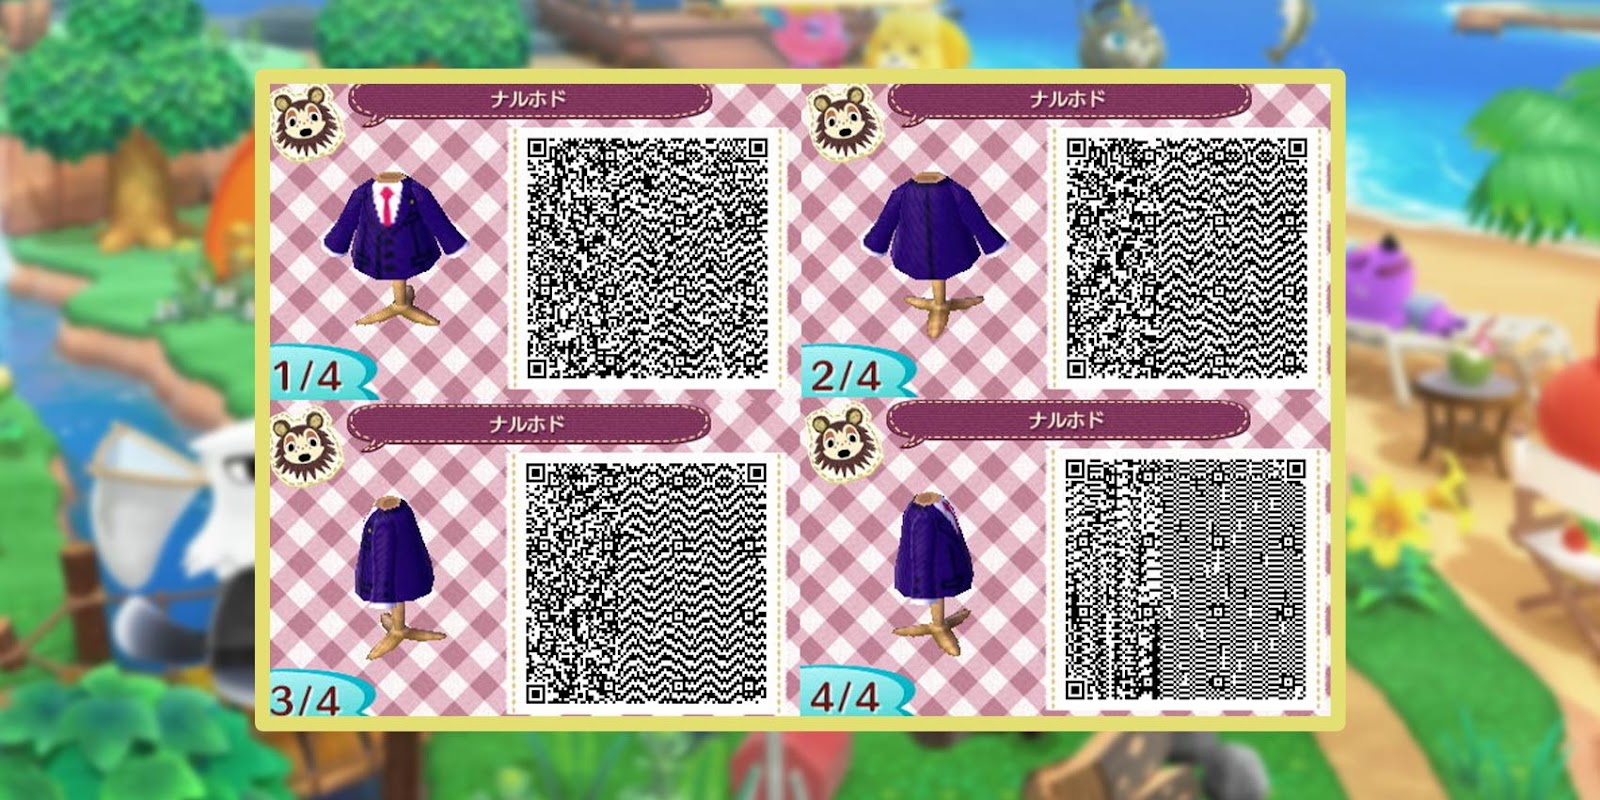 Ace attorney clothing QR code